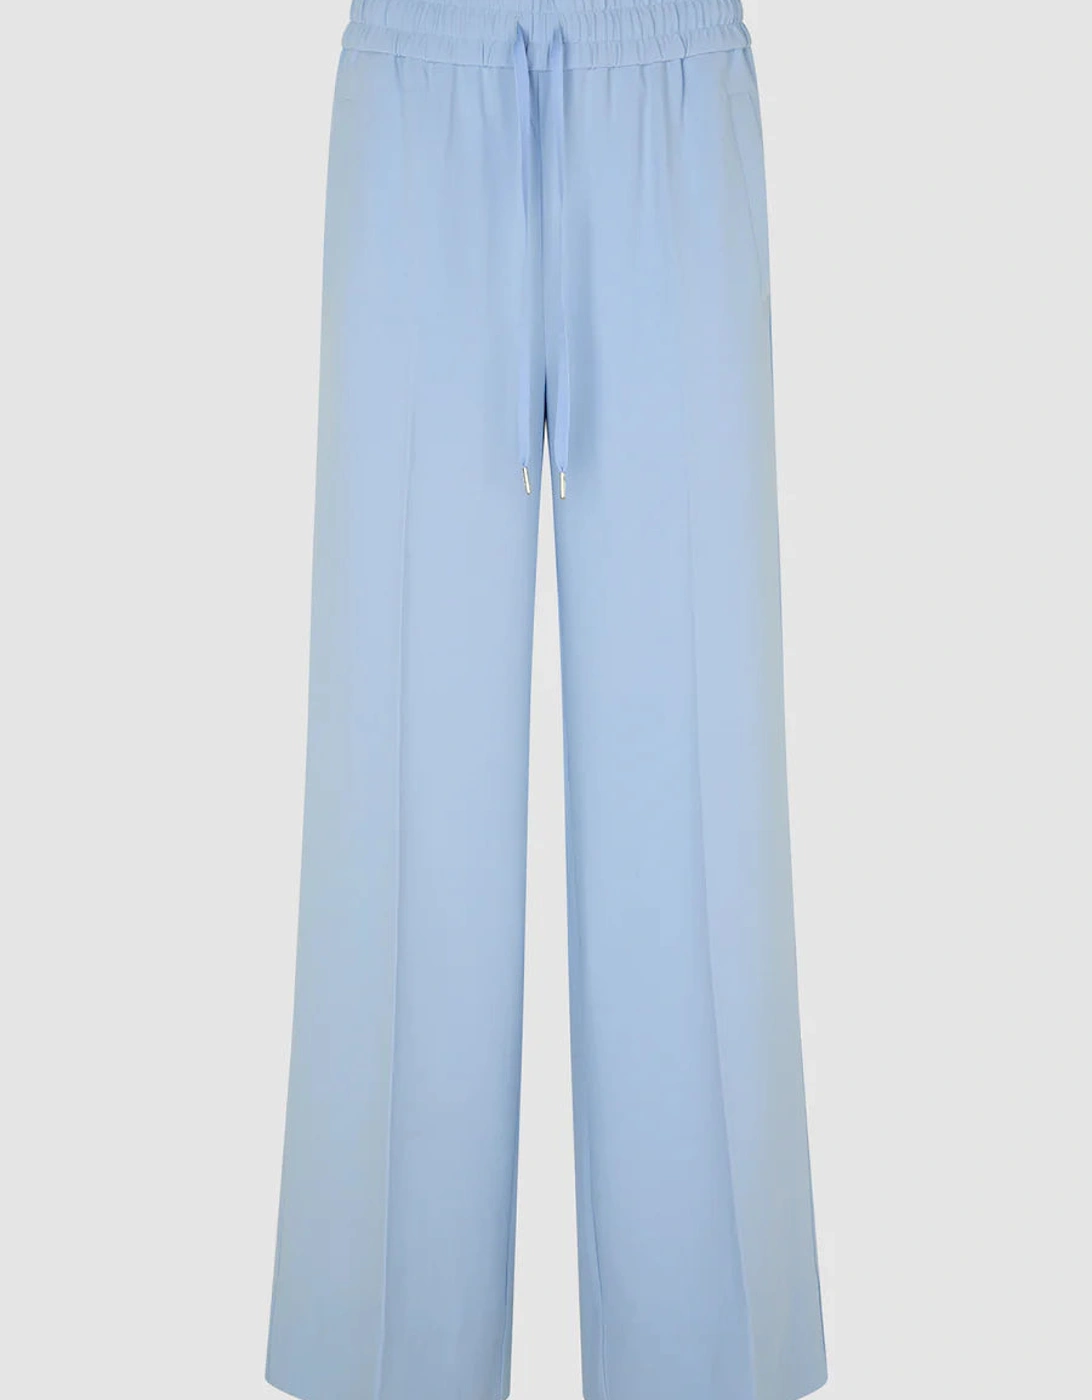 Ficaria trousers